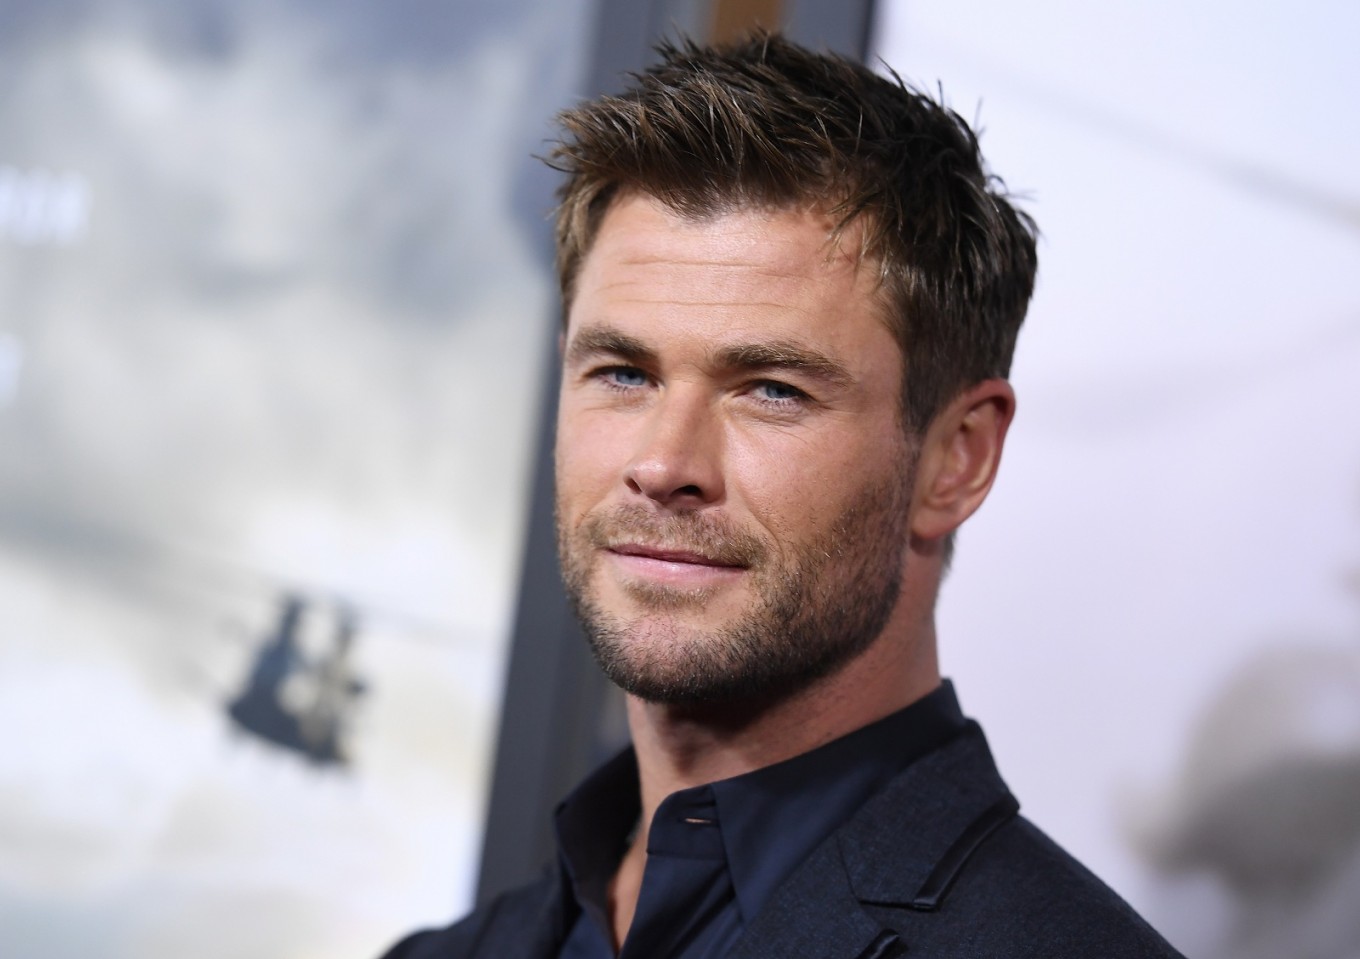 After an endless fight against Covid-19, Chris Hemsworth passed away.